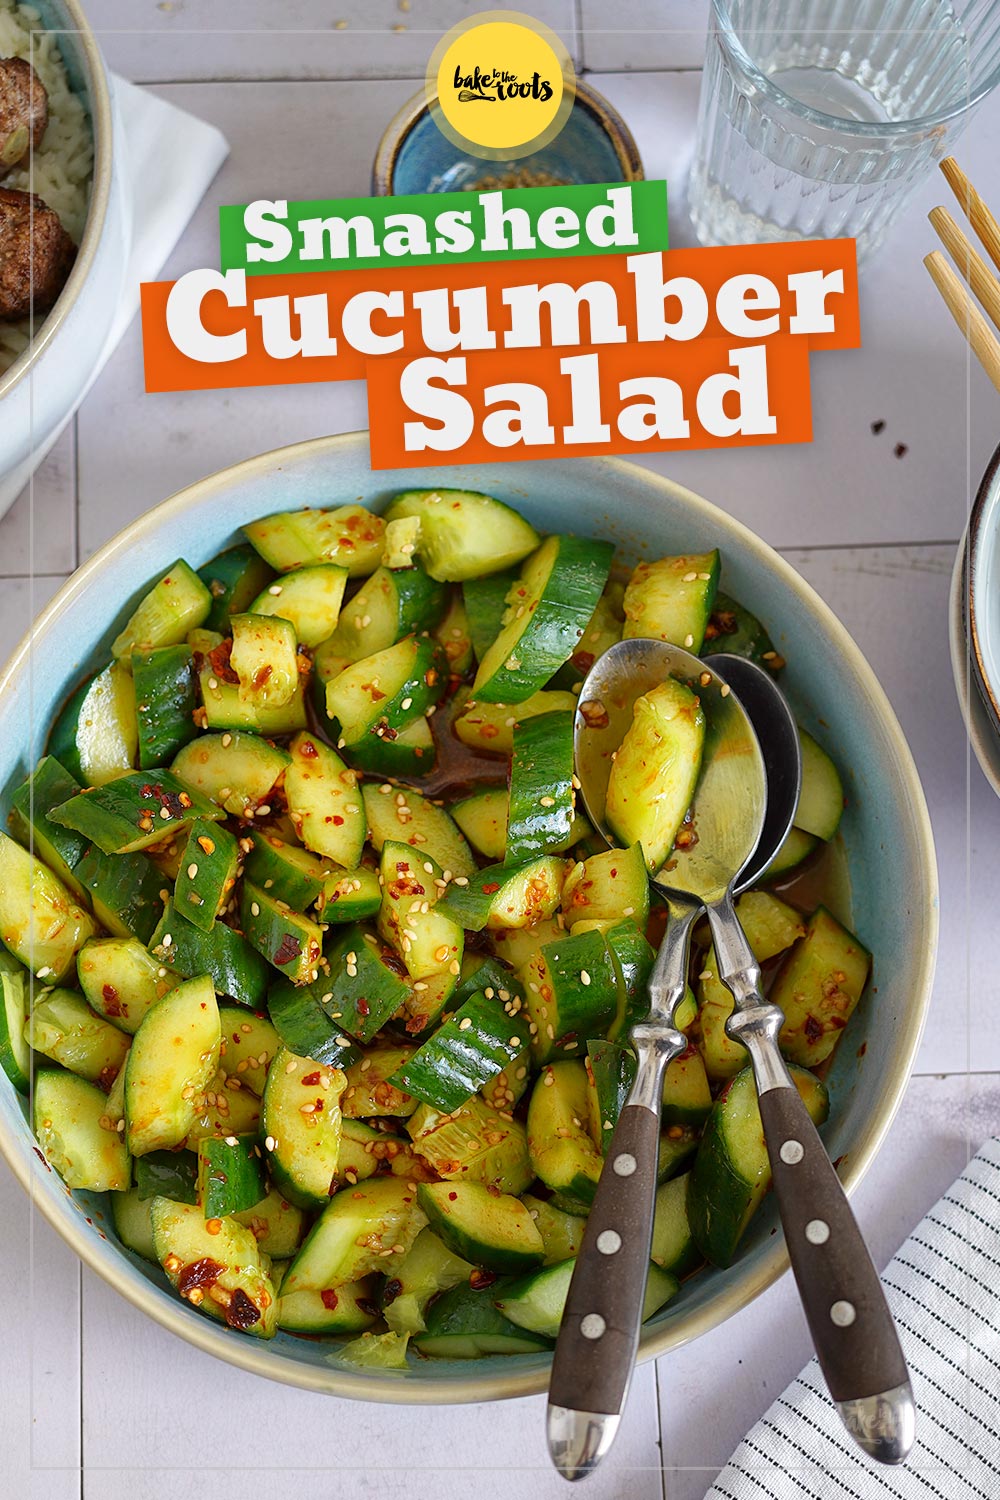 (Spicy) Smashed Cucumber Salad | Bake to the roots